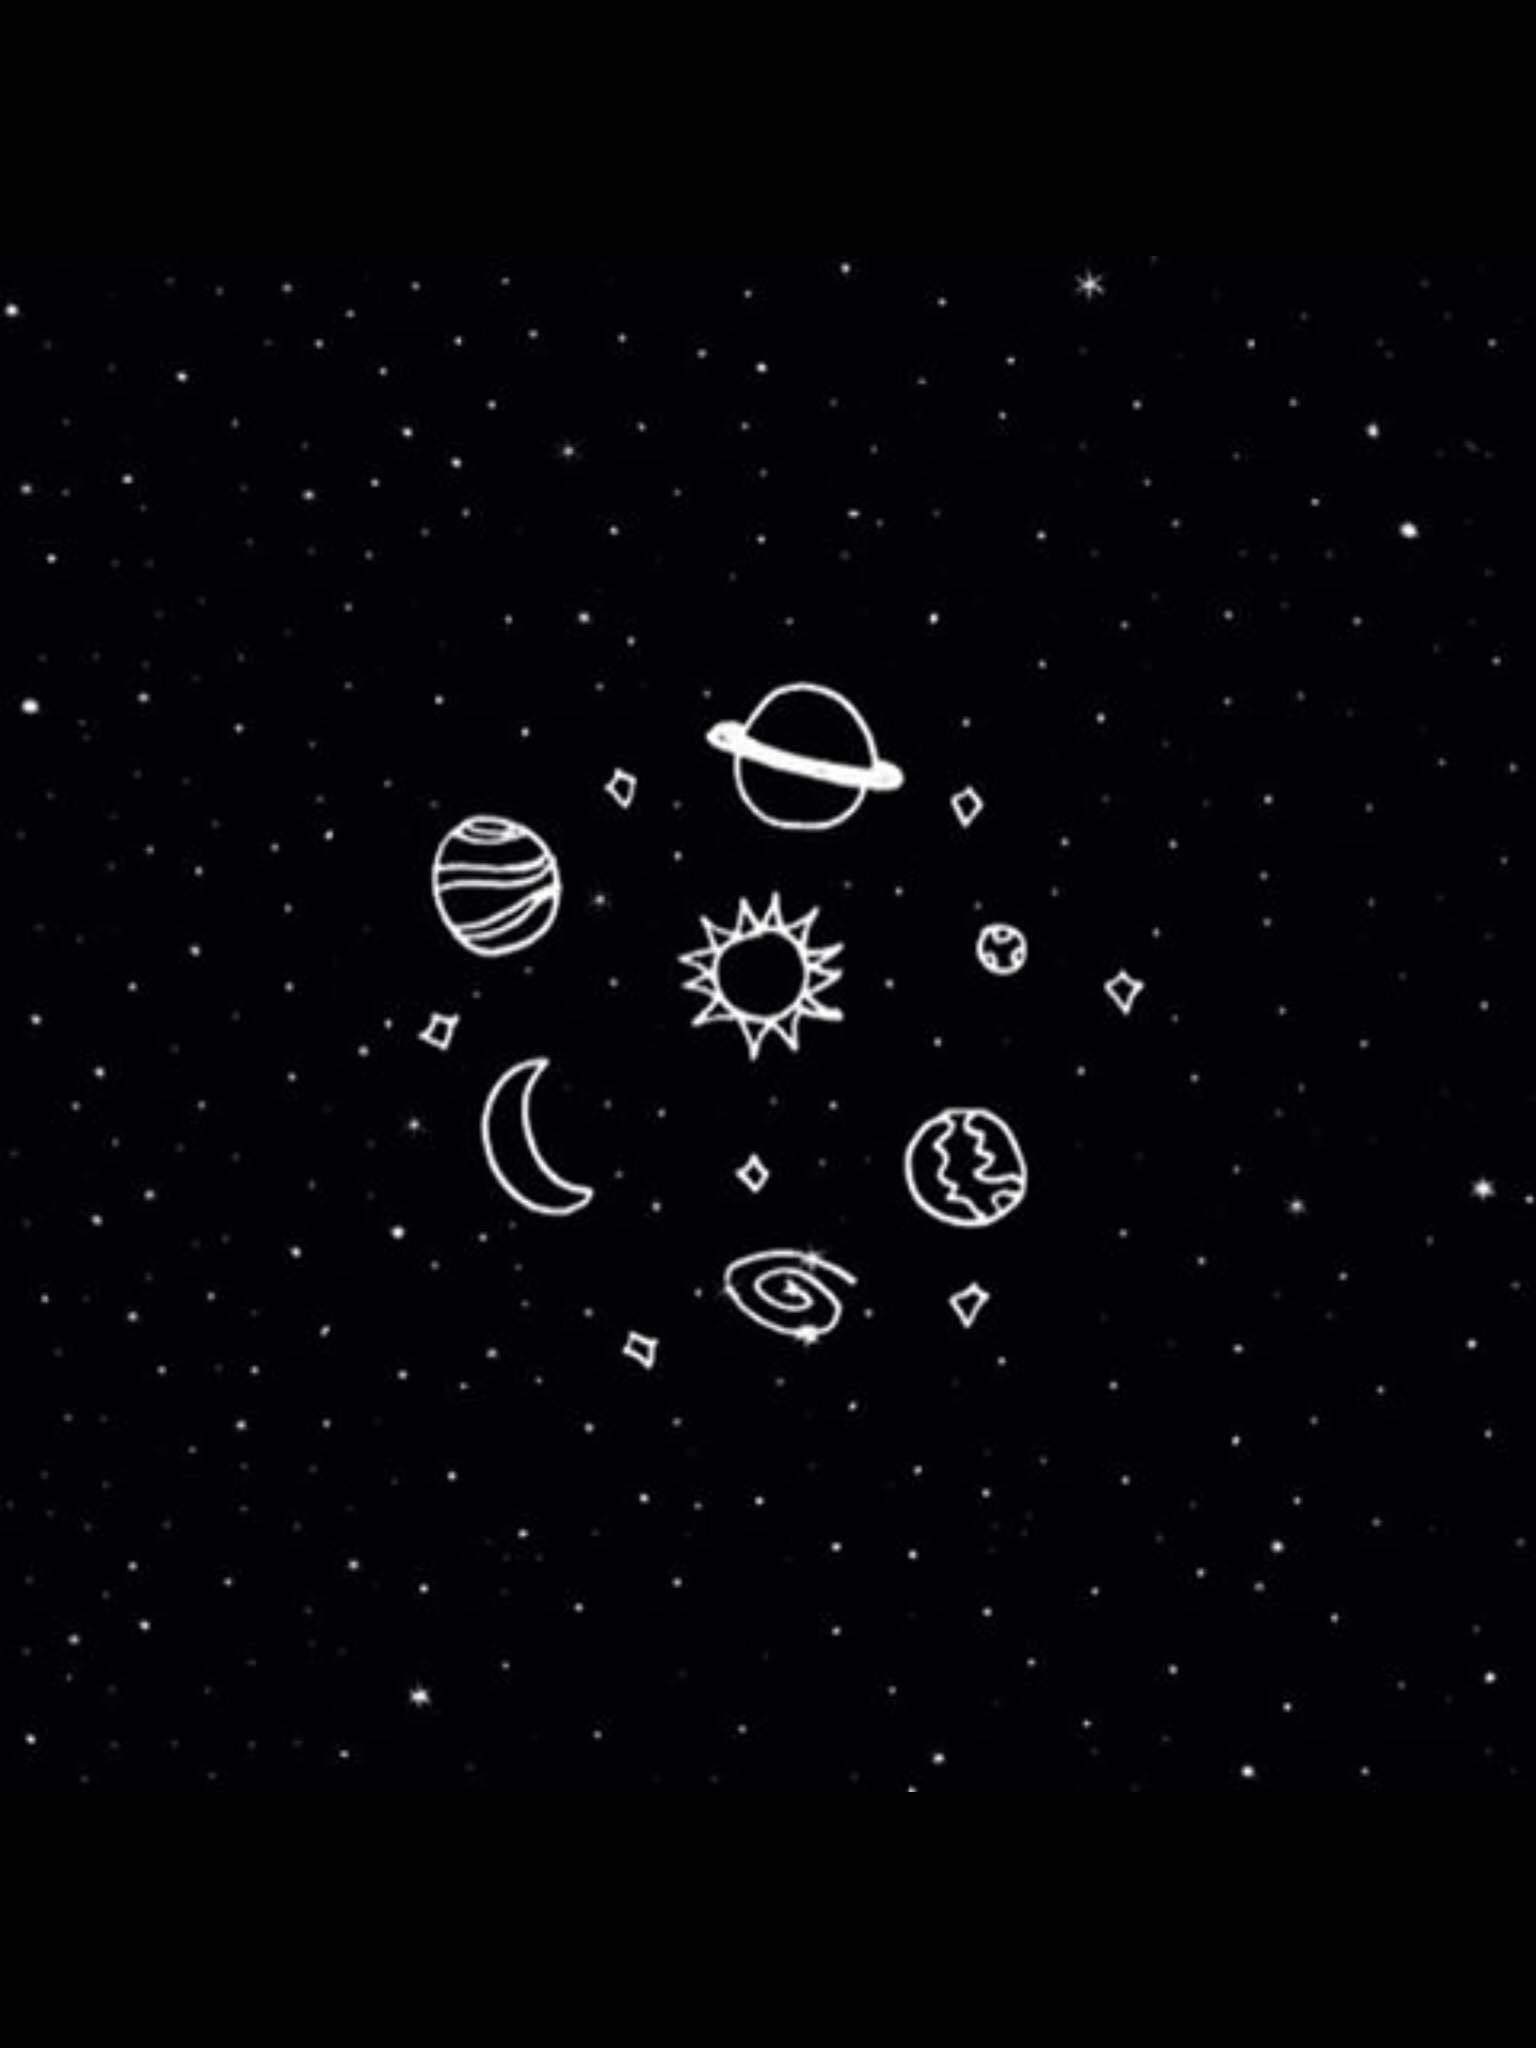 Aesthetic Black Planets And Stars